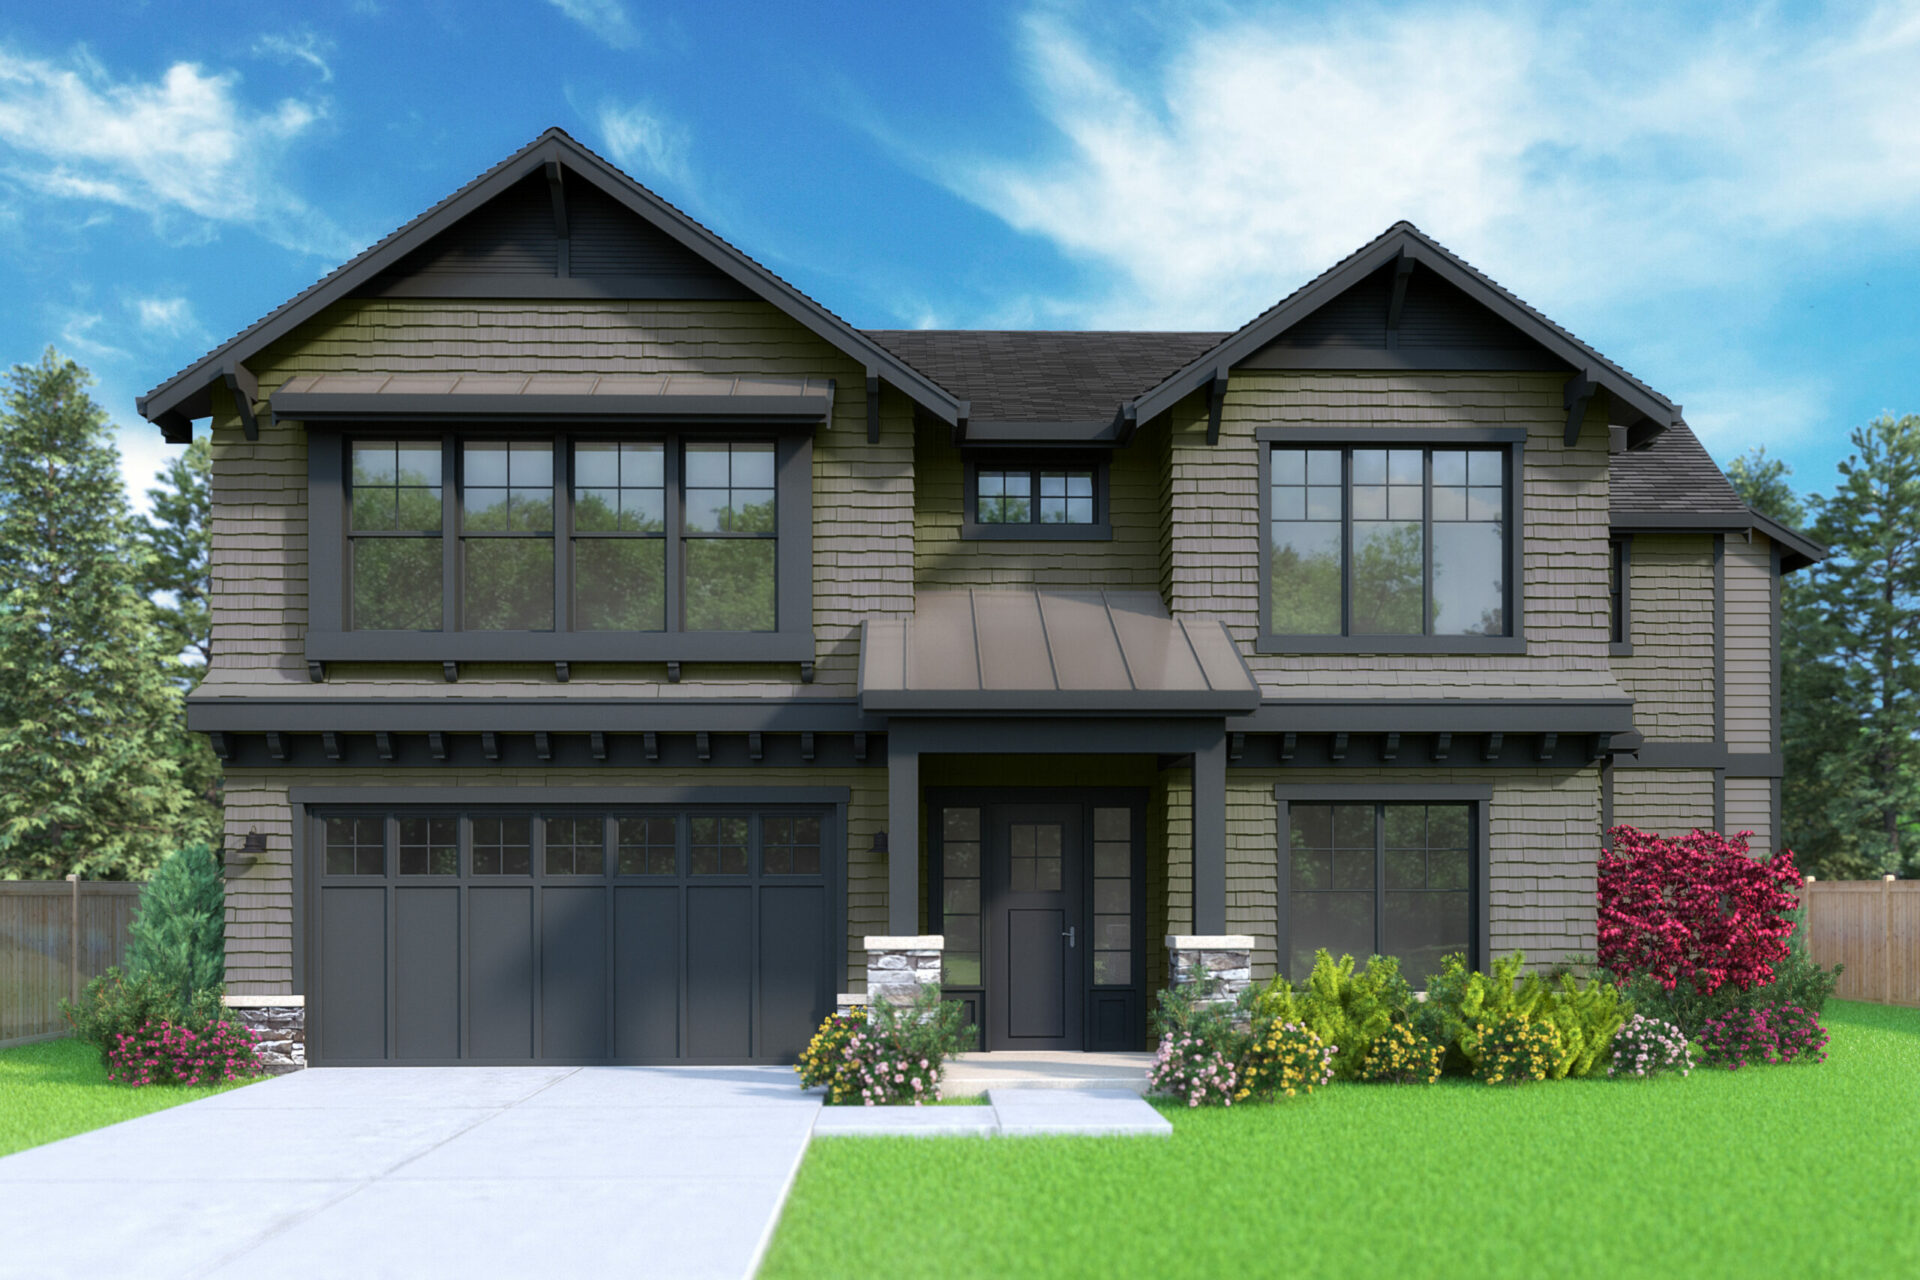 View our new luxury home construction on 2201 142nd AVE SE, in Bellevue, WA from MN Custom Homes